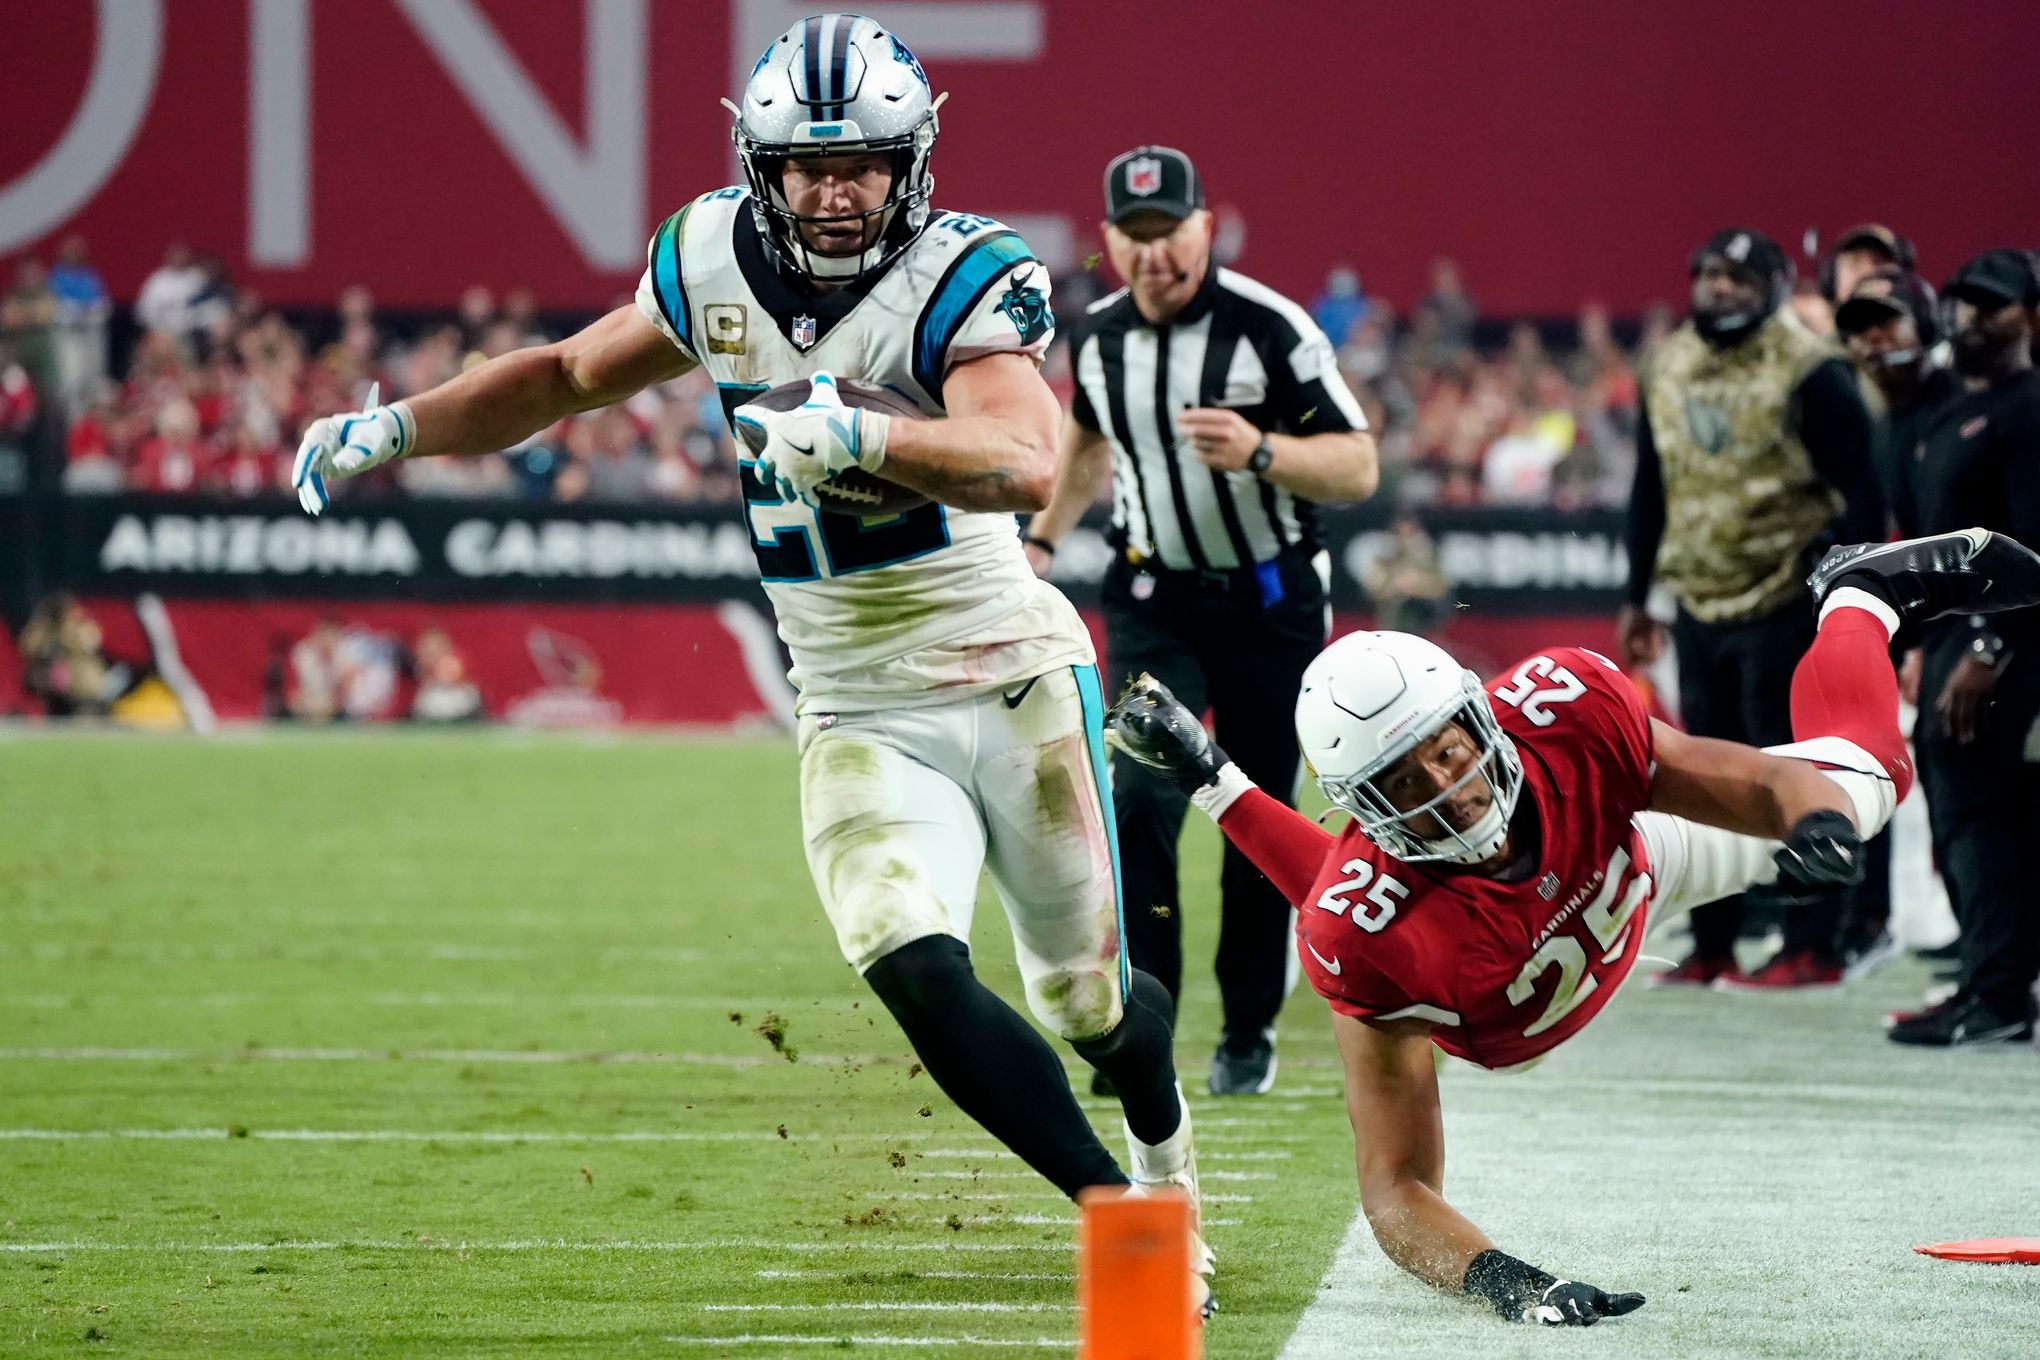 McCaffrey is first NFL player in over 15 years to record rush